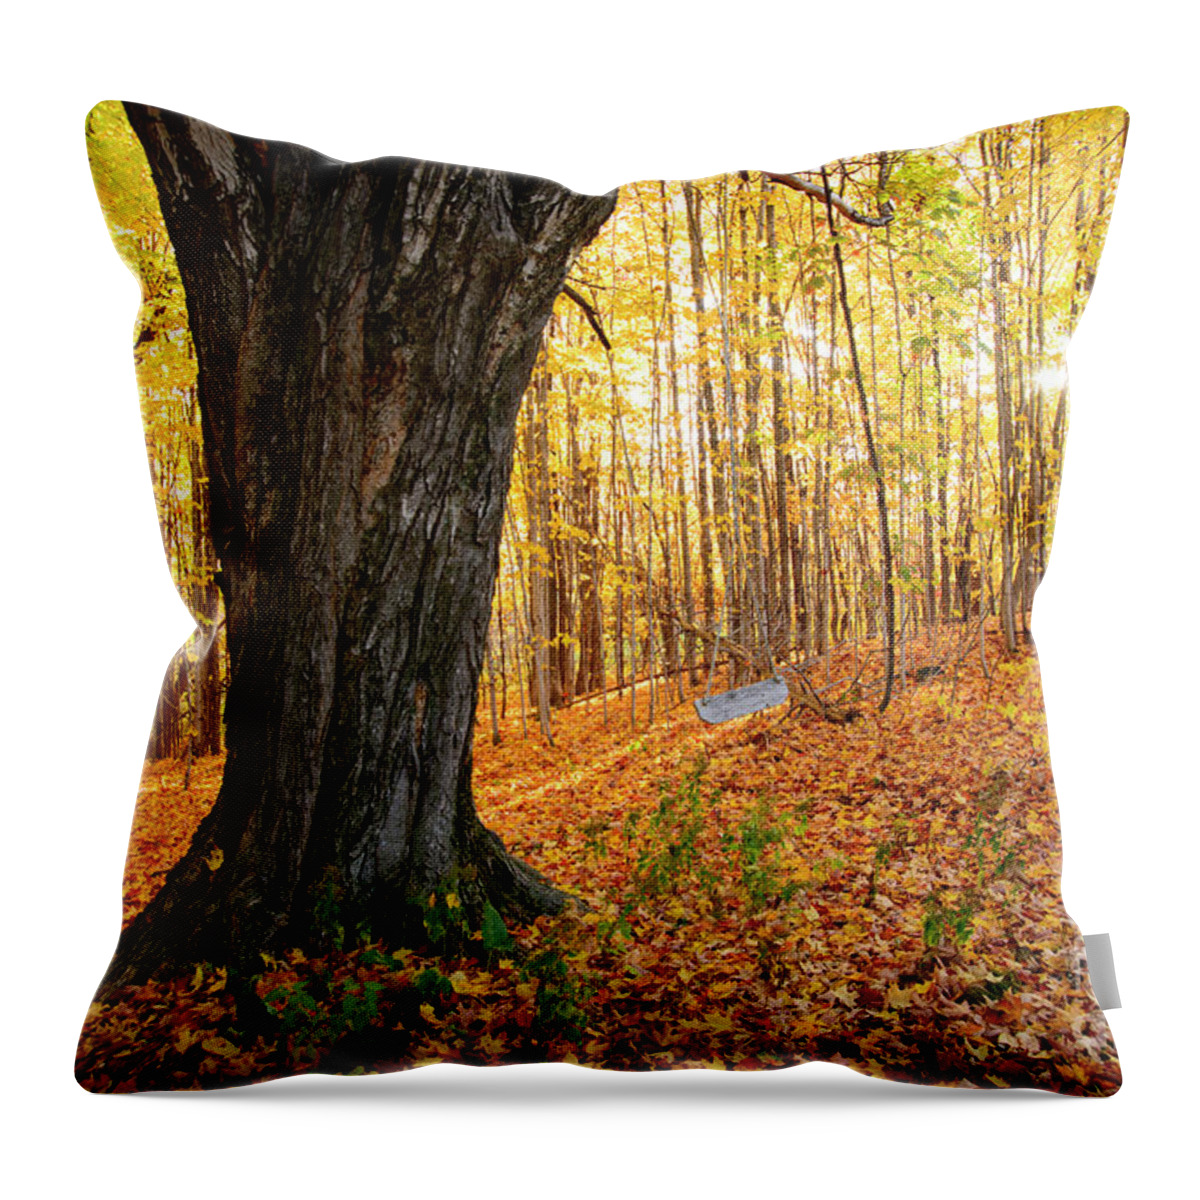 Maple Throw Pillow featuring the photograph Old Tree Swing by Alana Ranney